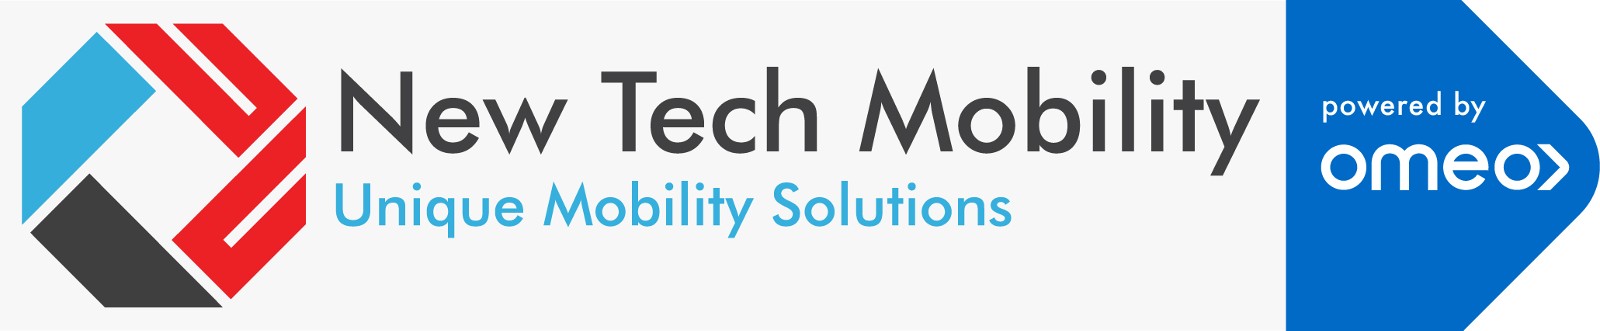 New Tech Mobility Powered by Omeo